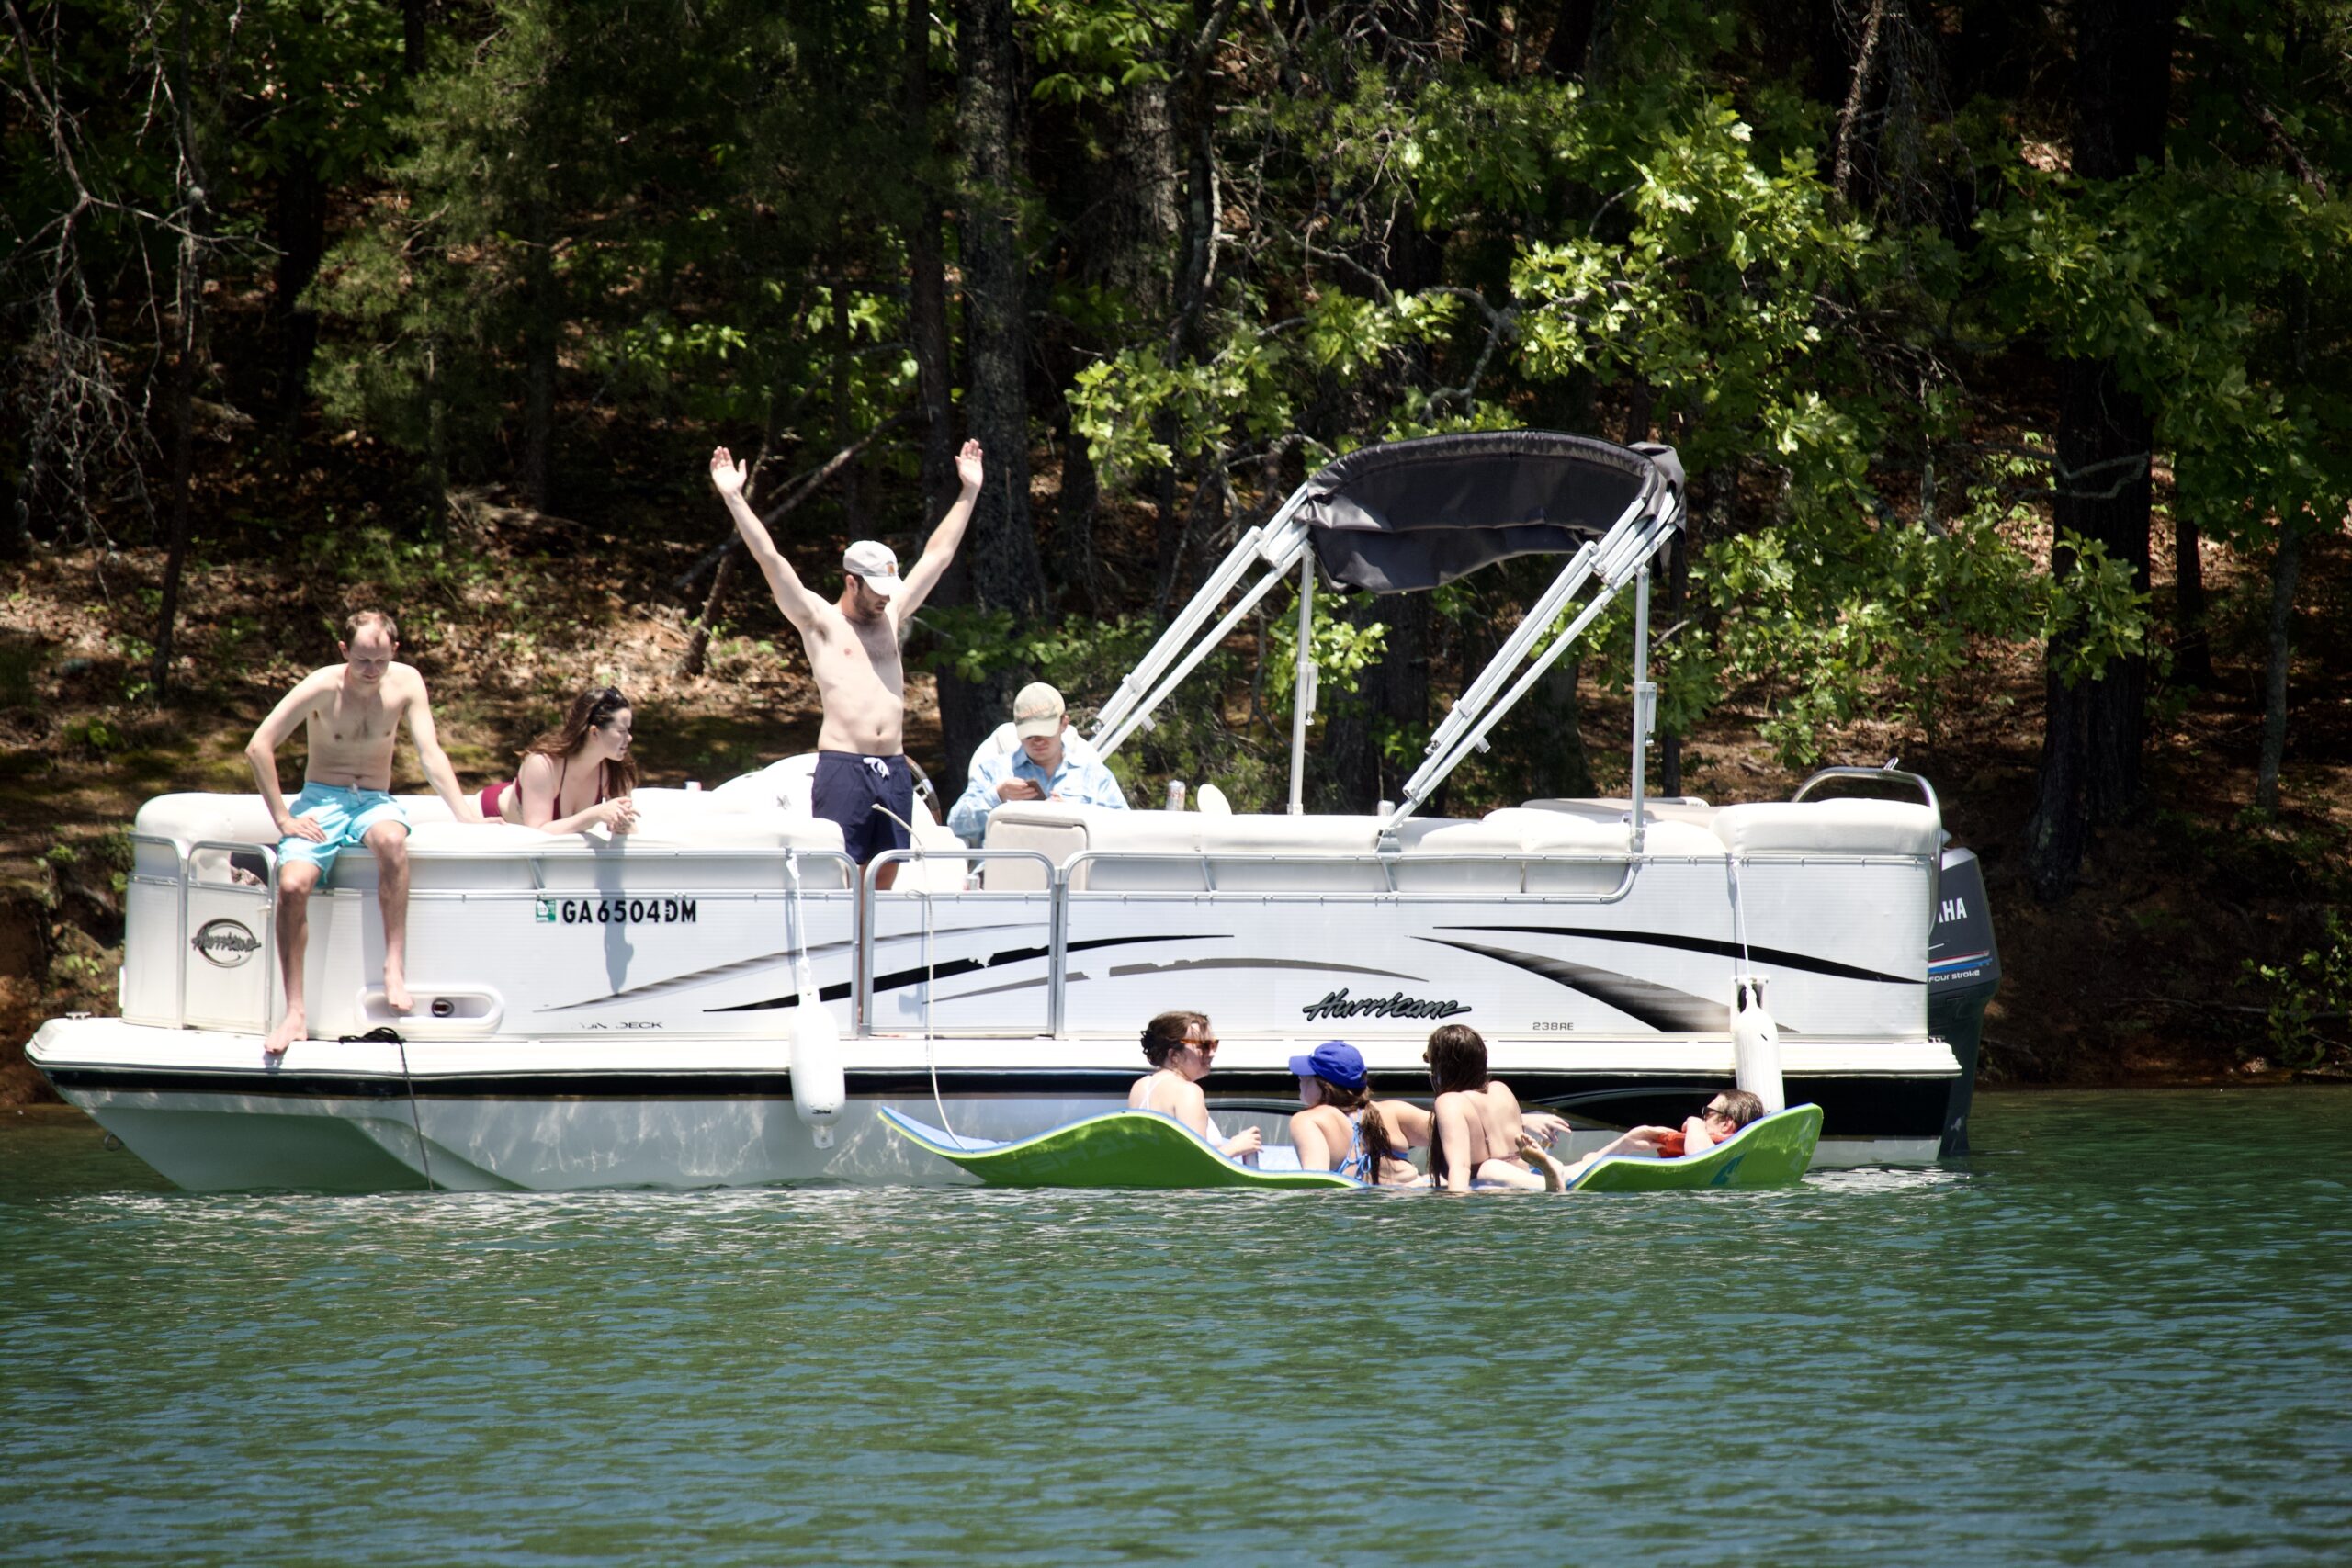 People With A Hurricane Deck boat & Lily pad on Lake Blue Ridge